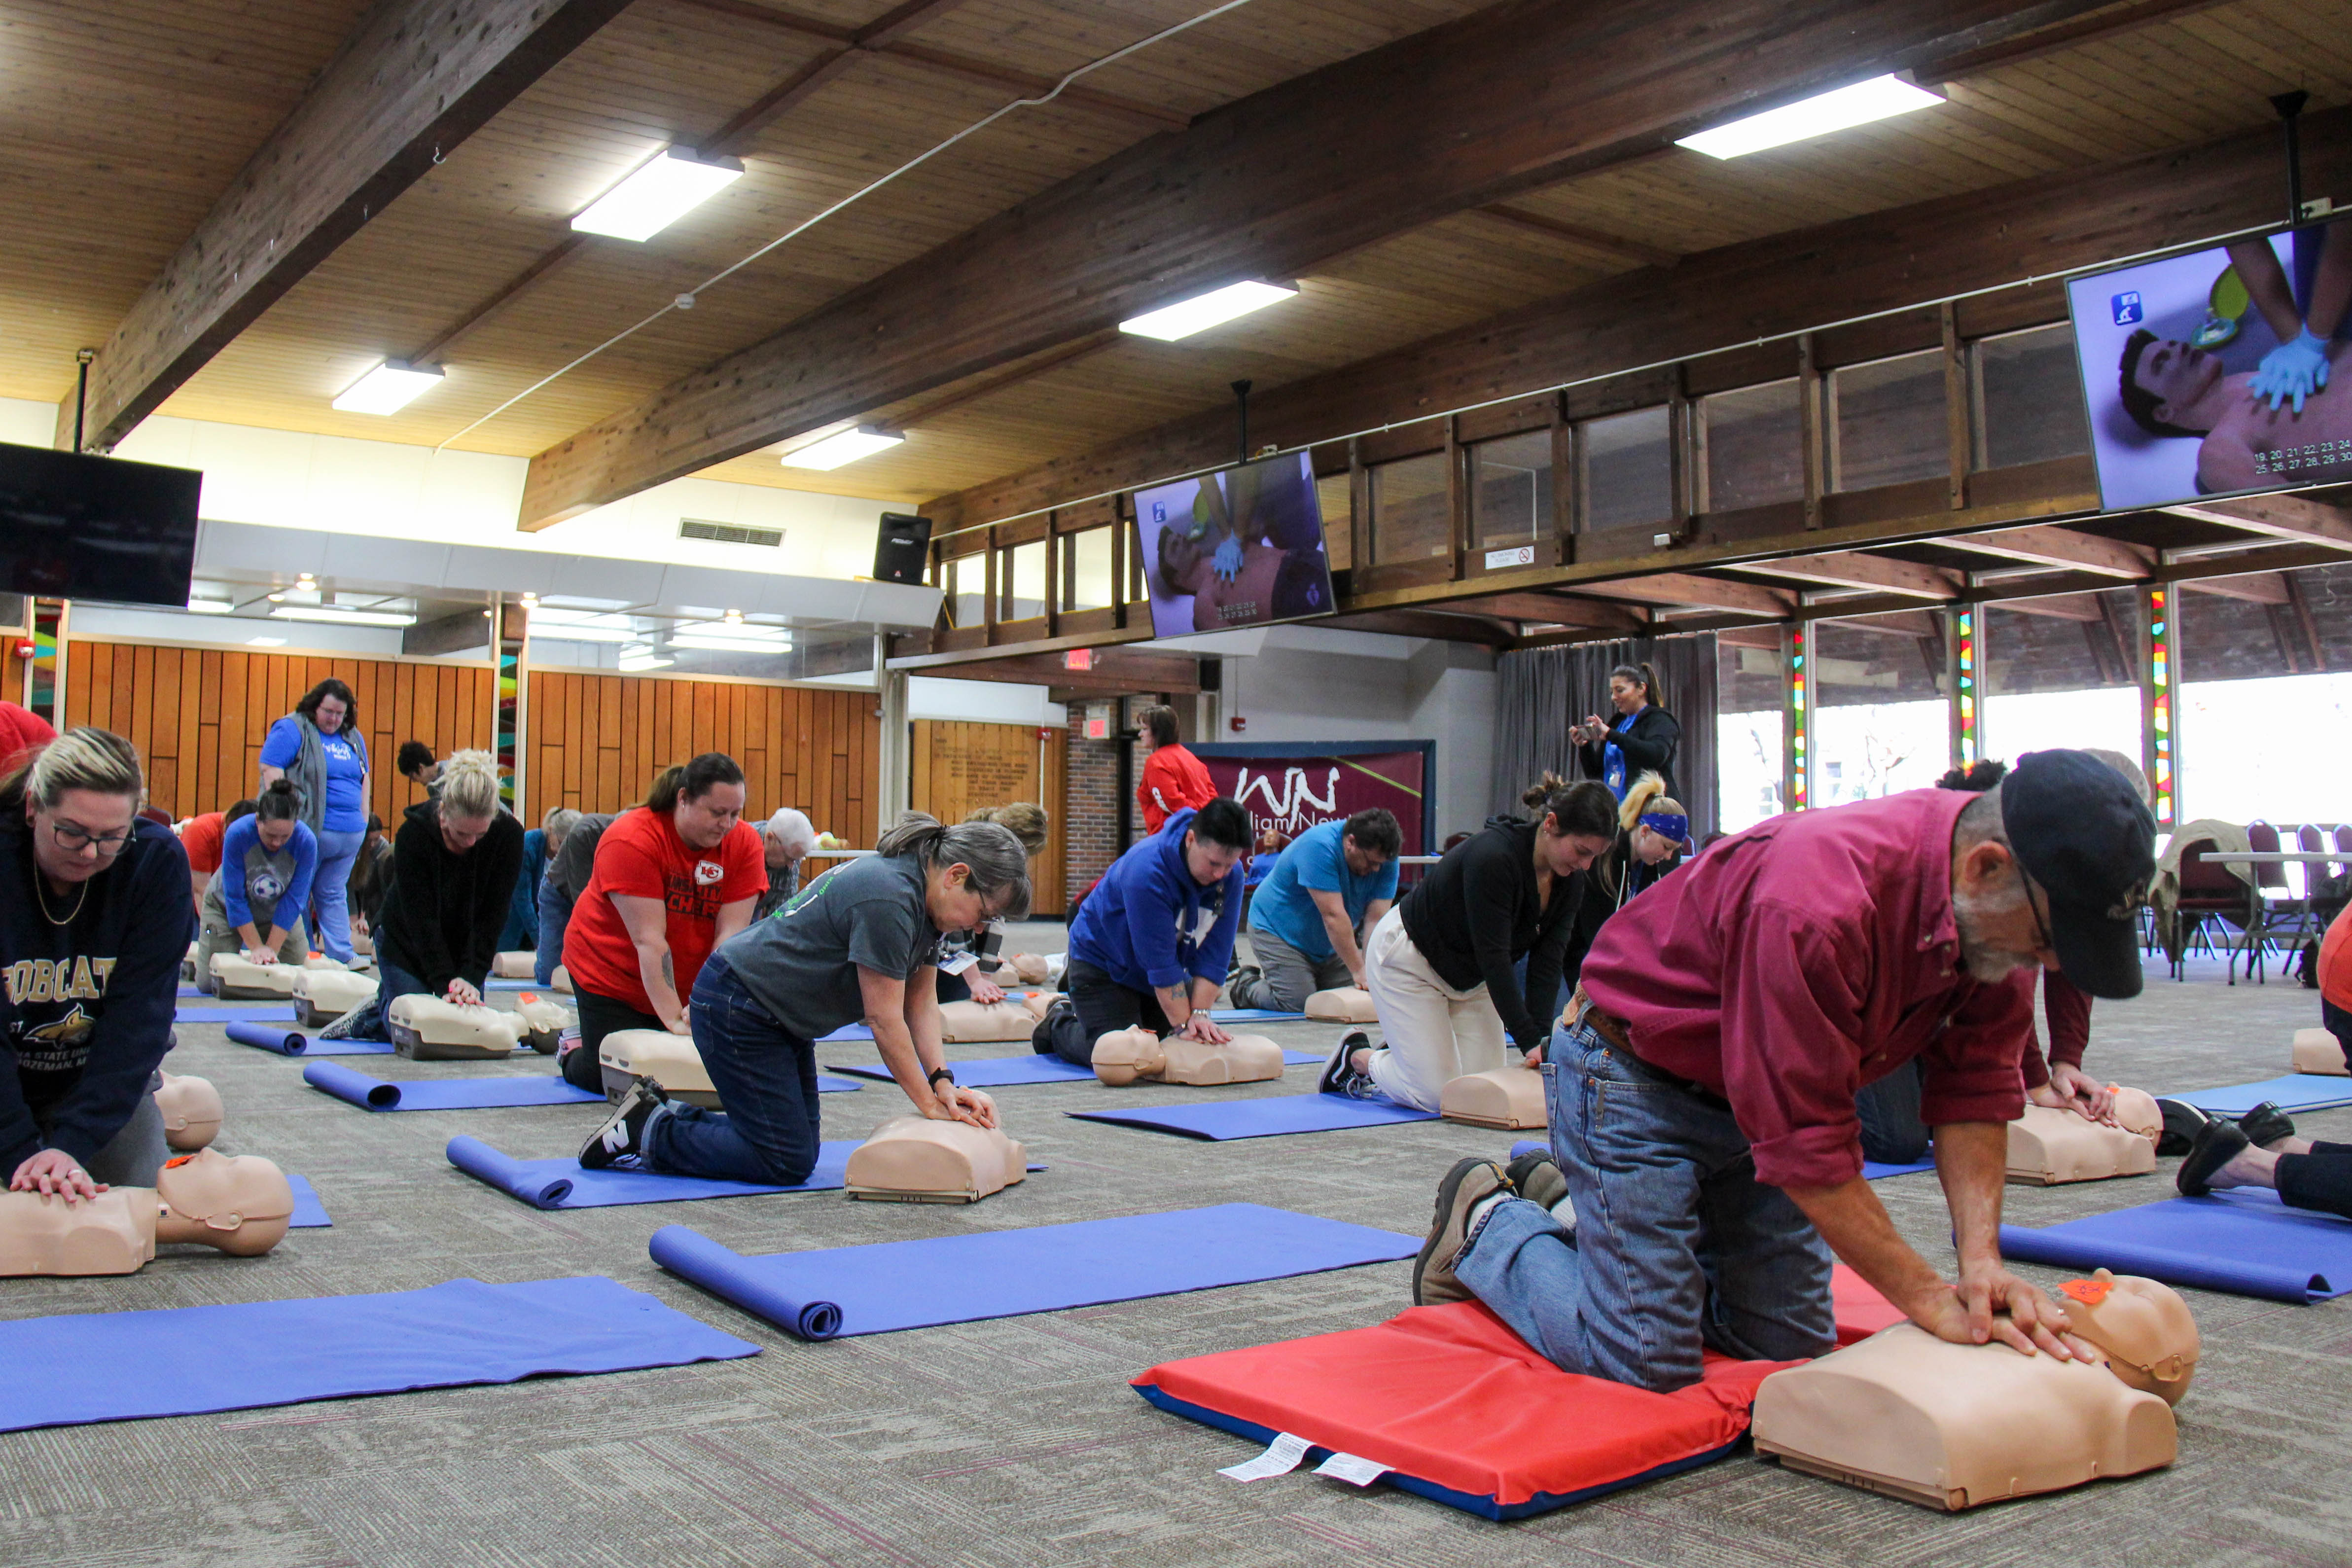 Last year, nearly 70 professionals and community members were certified in CPR at Baden Square as part of the Beats Go On community wellness initiative.